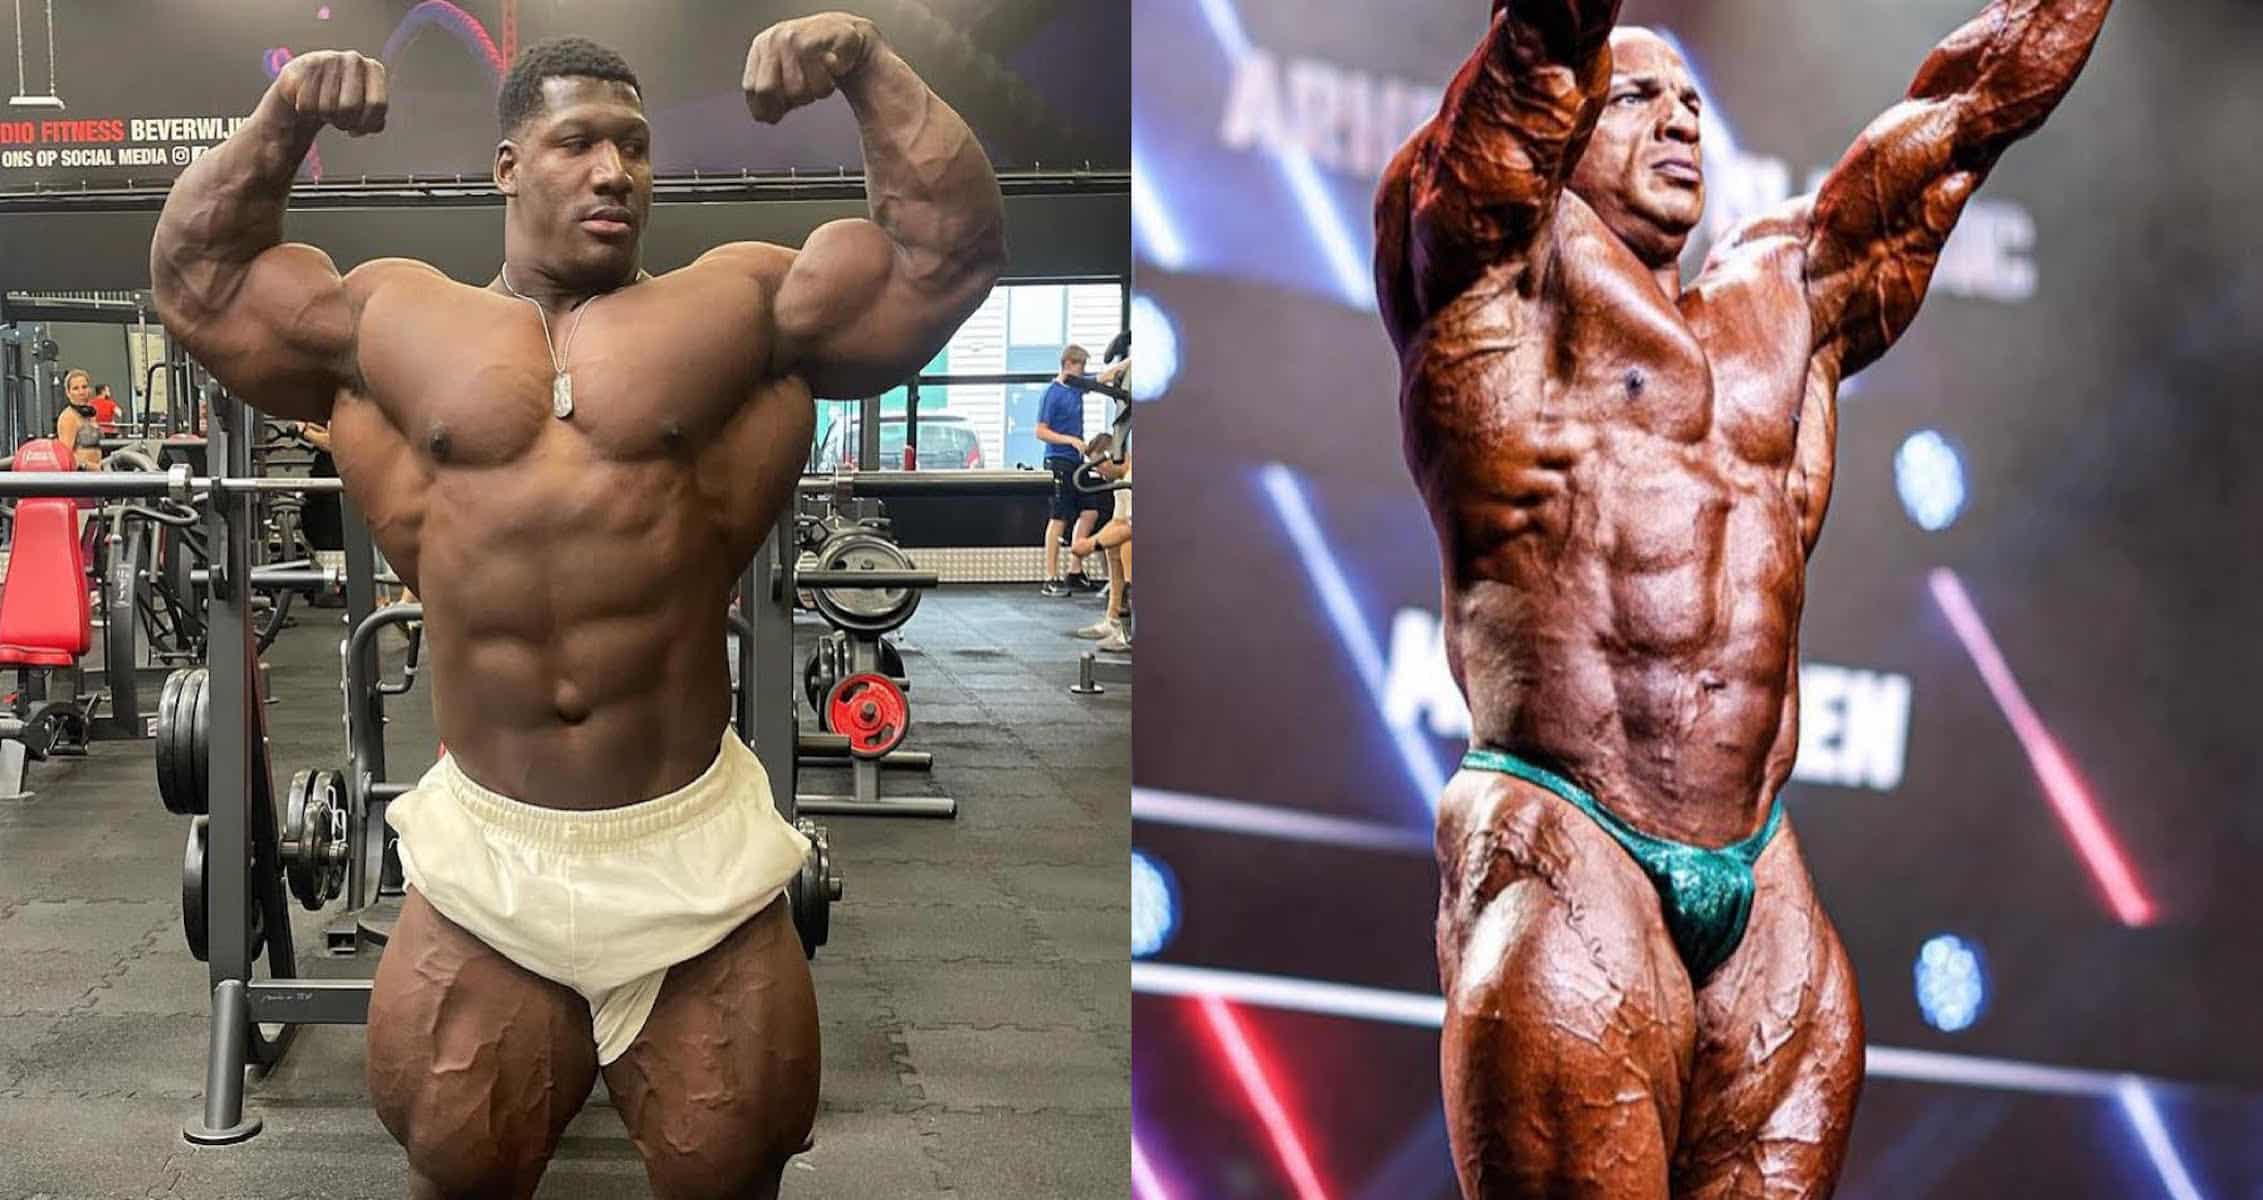 Hamstrings Bigger Than Both My Legs”: Besides His 20-Inch Neck,  Bodybuilding 'Neckzilla' Also Goes Viral Online for His Larger-Than-Normal  Quads - EssentiallySports